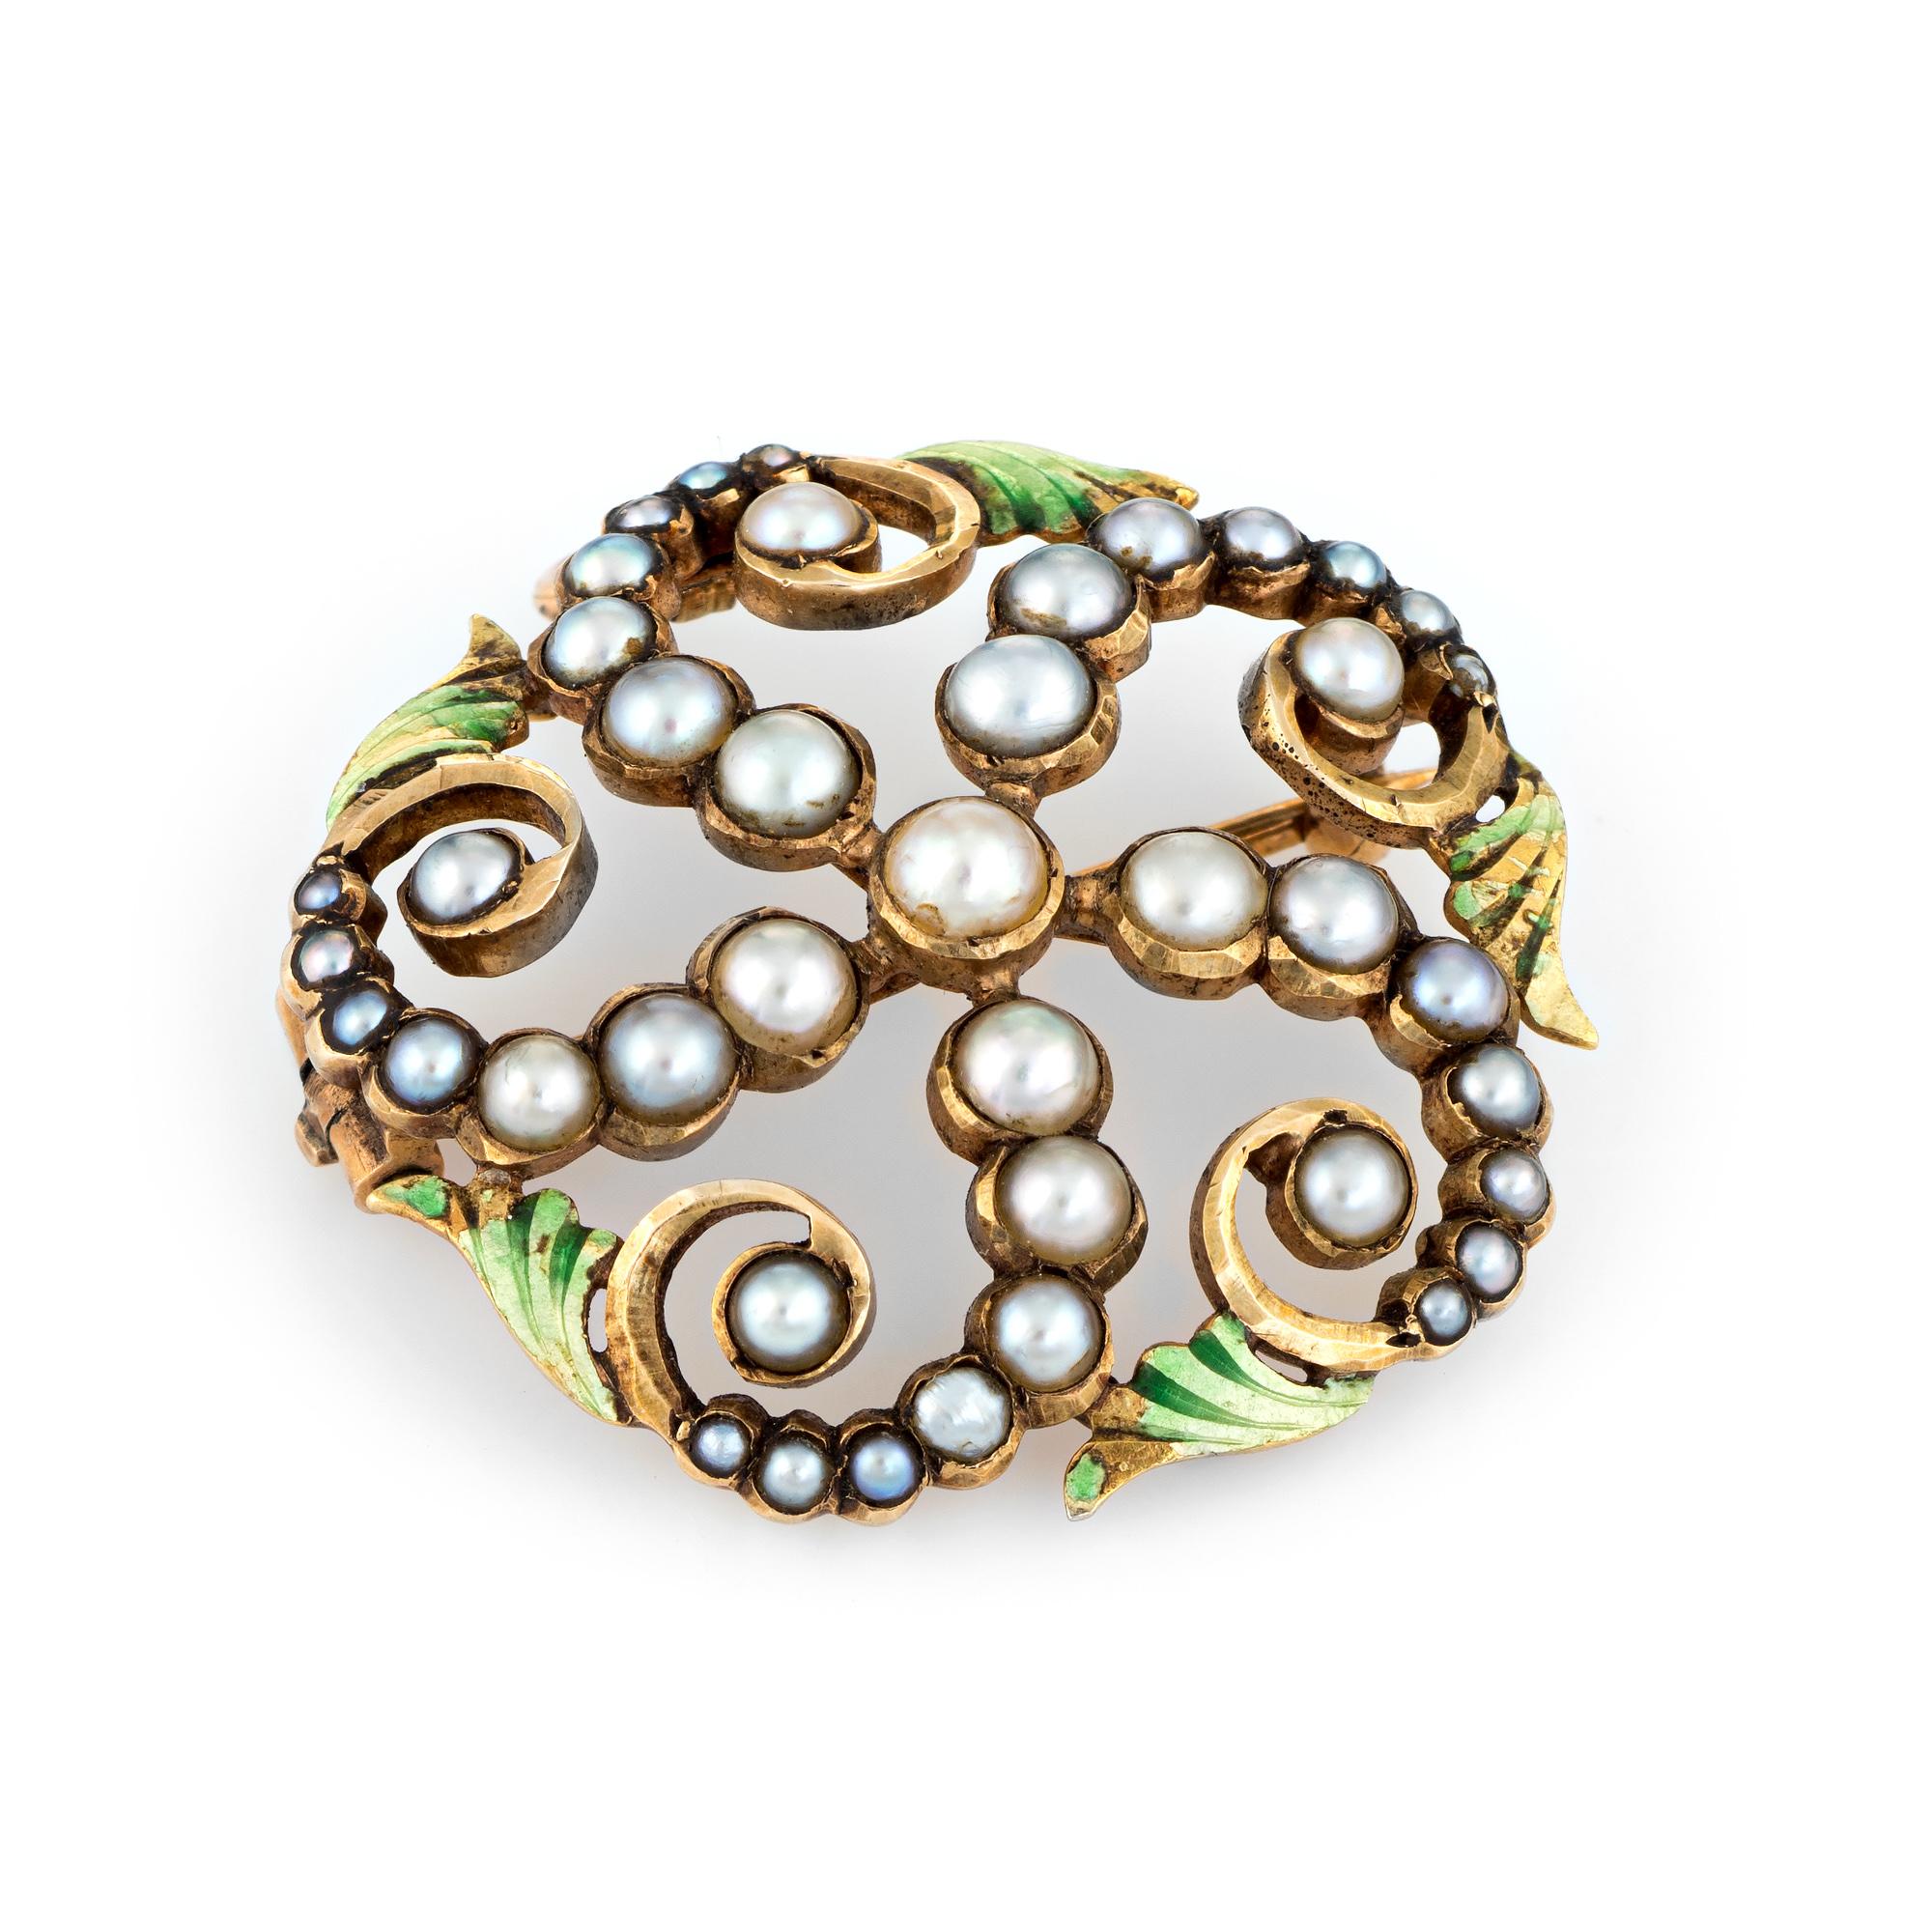 Finely detailed antique Victorian circular pendant or brooch (circa 1880s to 1900s), crafted in 14 karat rose gold. 

Seed pearls ranging in size from 1mm to 2.5mm. The pearls appear to be original to the piece with some graduation in color evident.